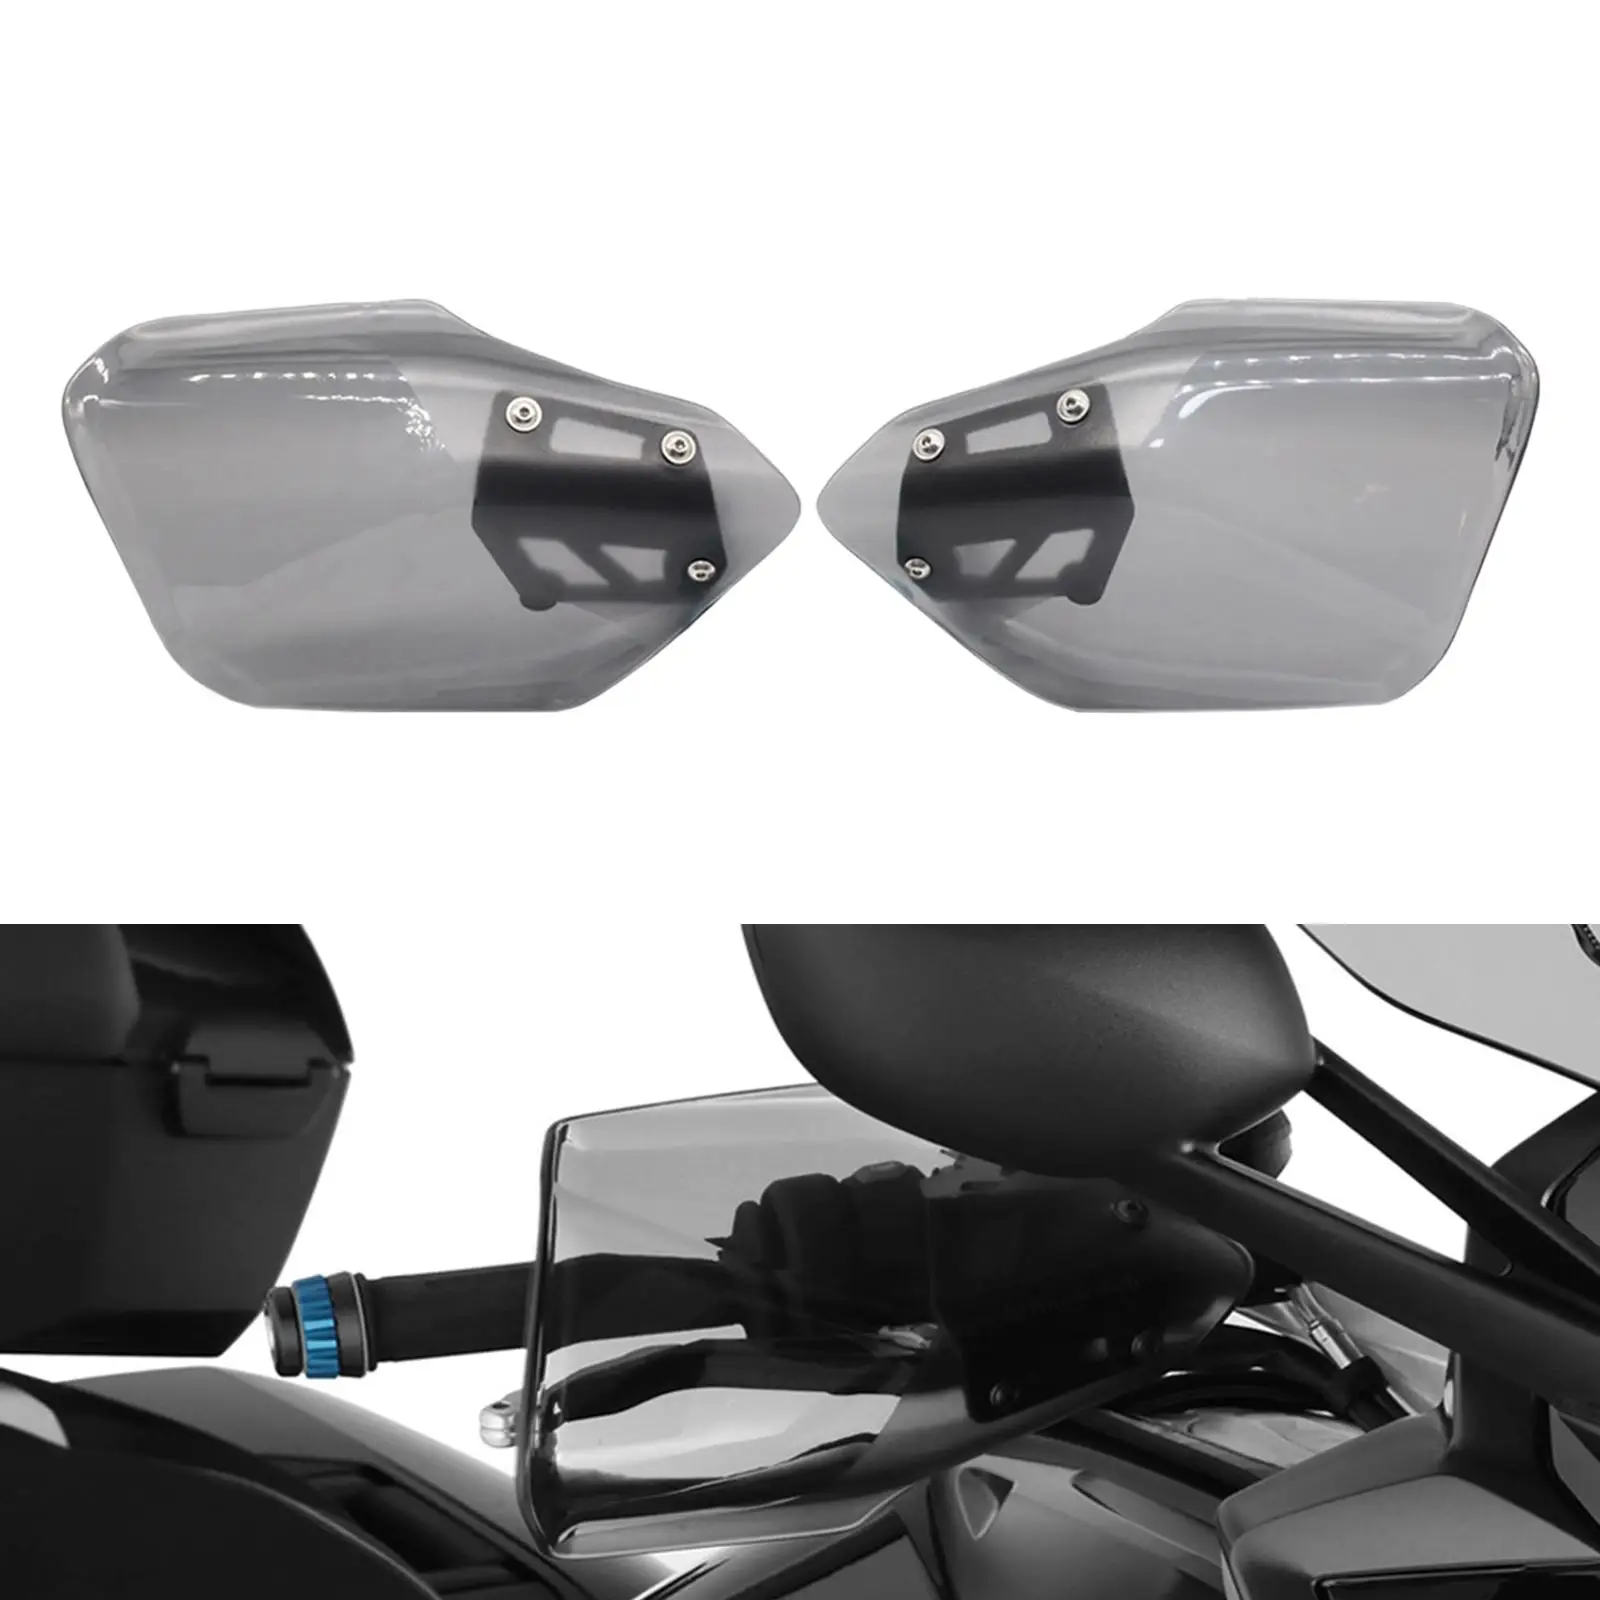 2x Motorcycle Hand Guard Hand Guard Shield, Deflectors, Protective , Handlebar  for BMW K 1600 Gtl Accessories Replace